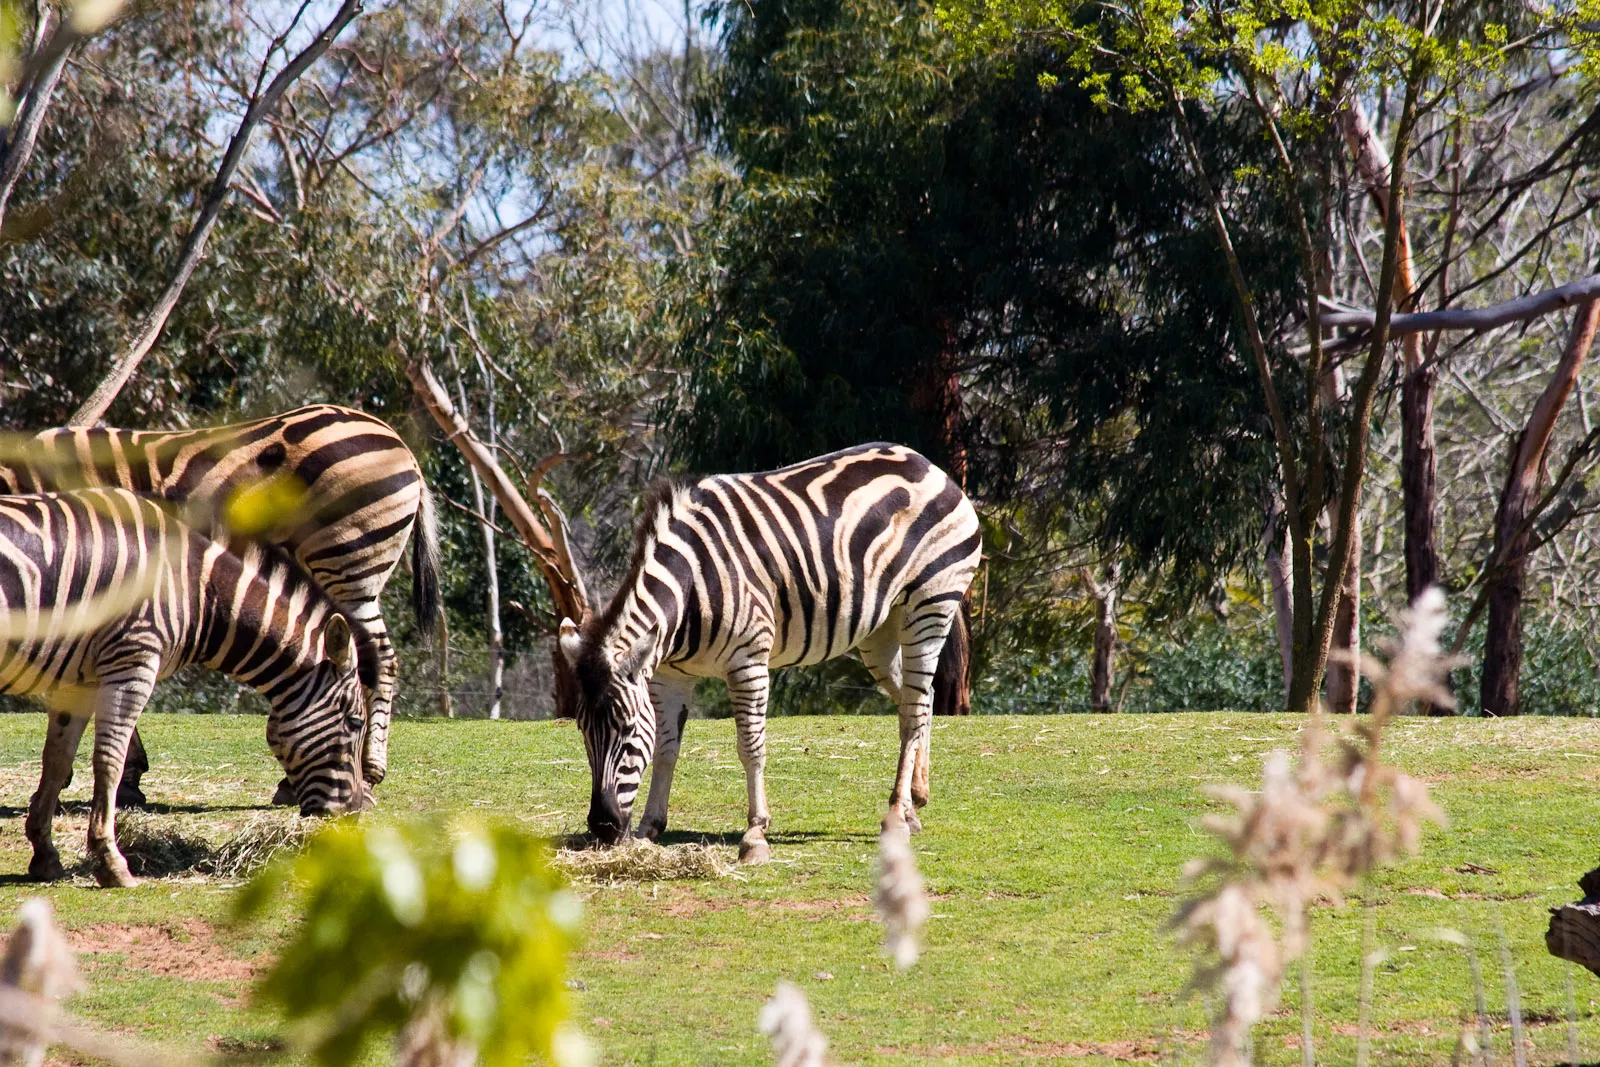 Melbourne Zoo in Australia, Australia and Oceania | Nature Reserves - Rated 3.6